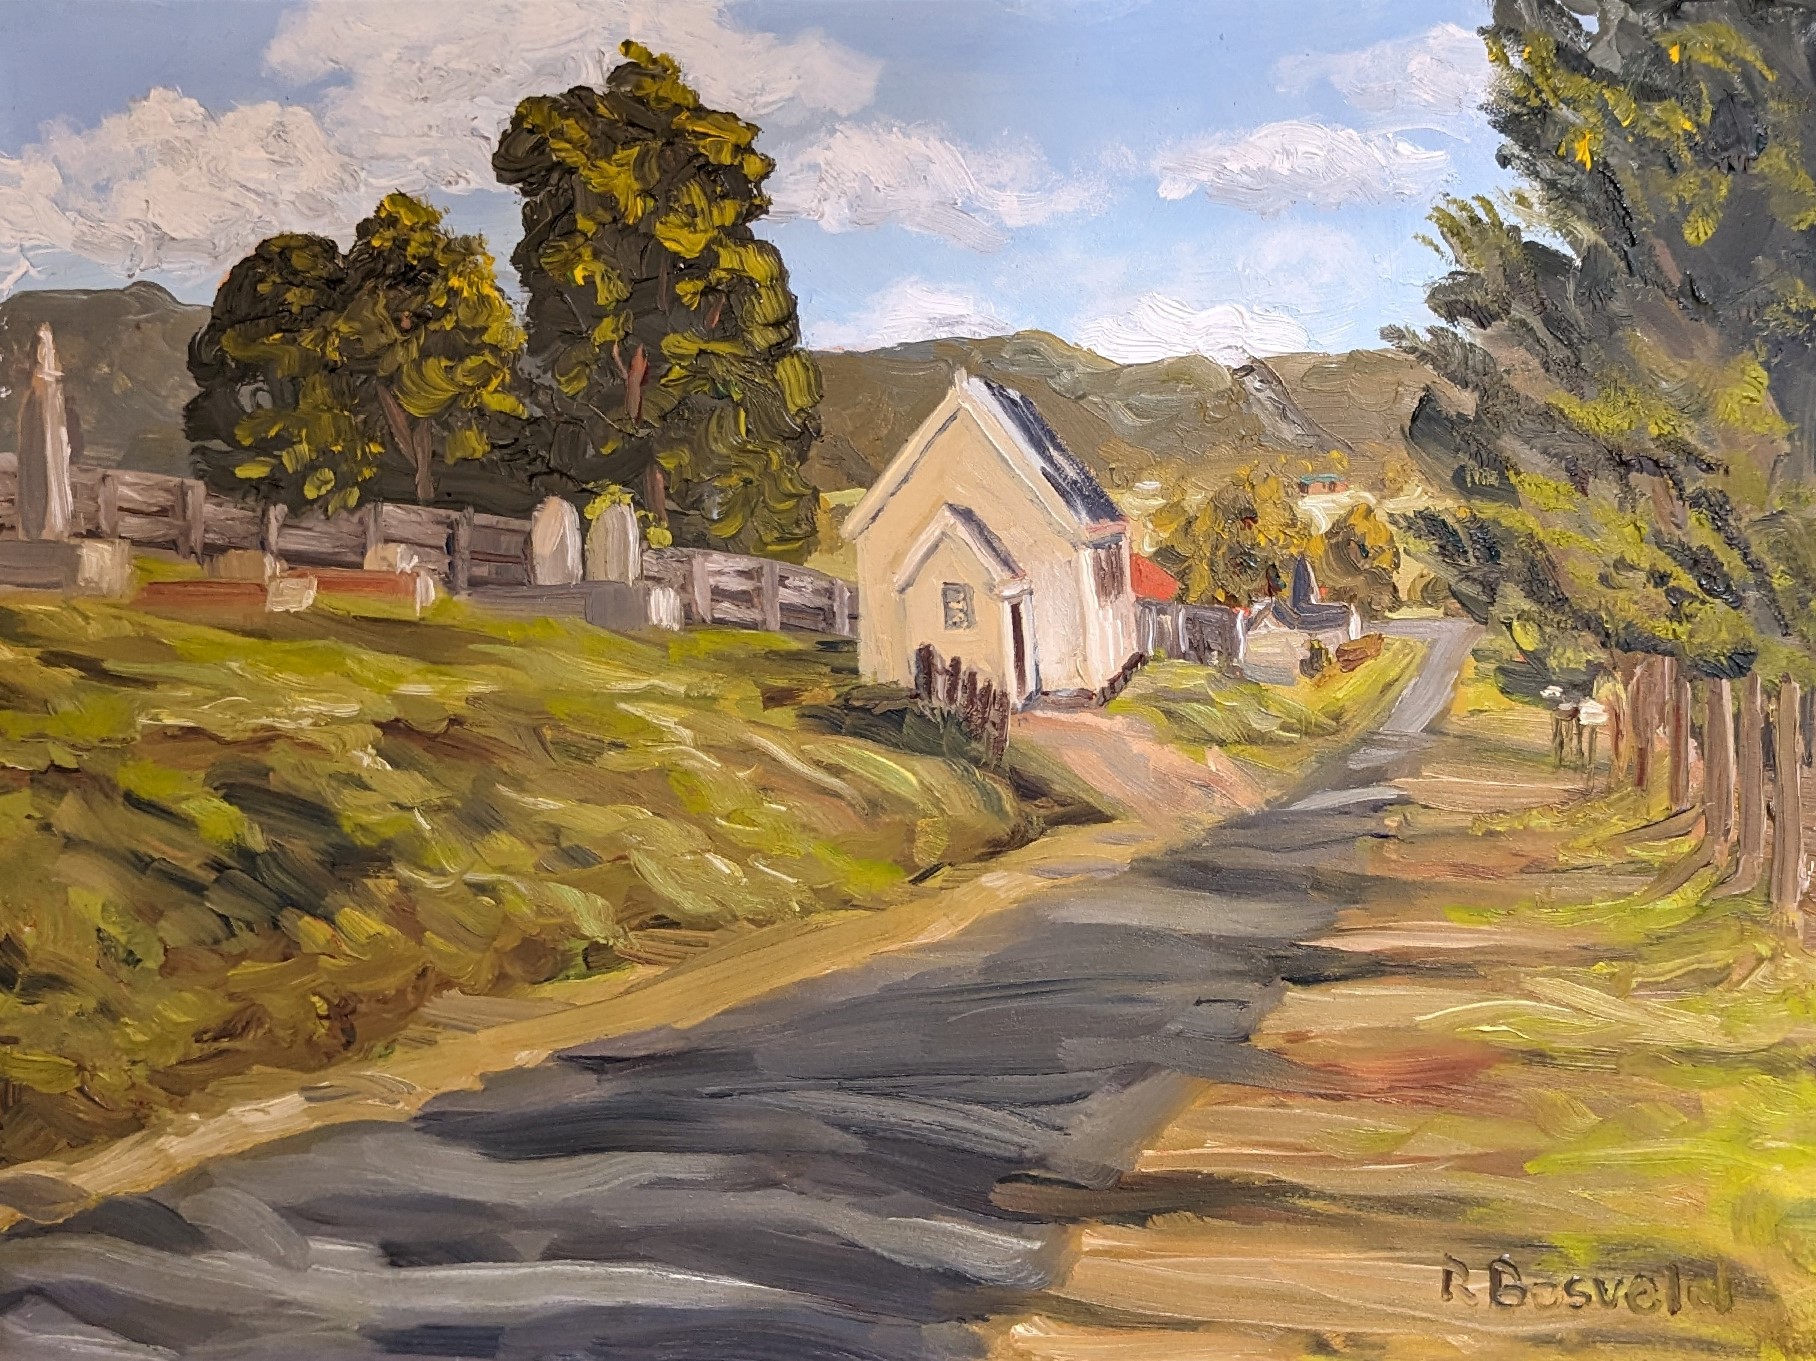 Ruth Bosveld, "Collinsvale United Church," oil on panel, 9 x 12 in.